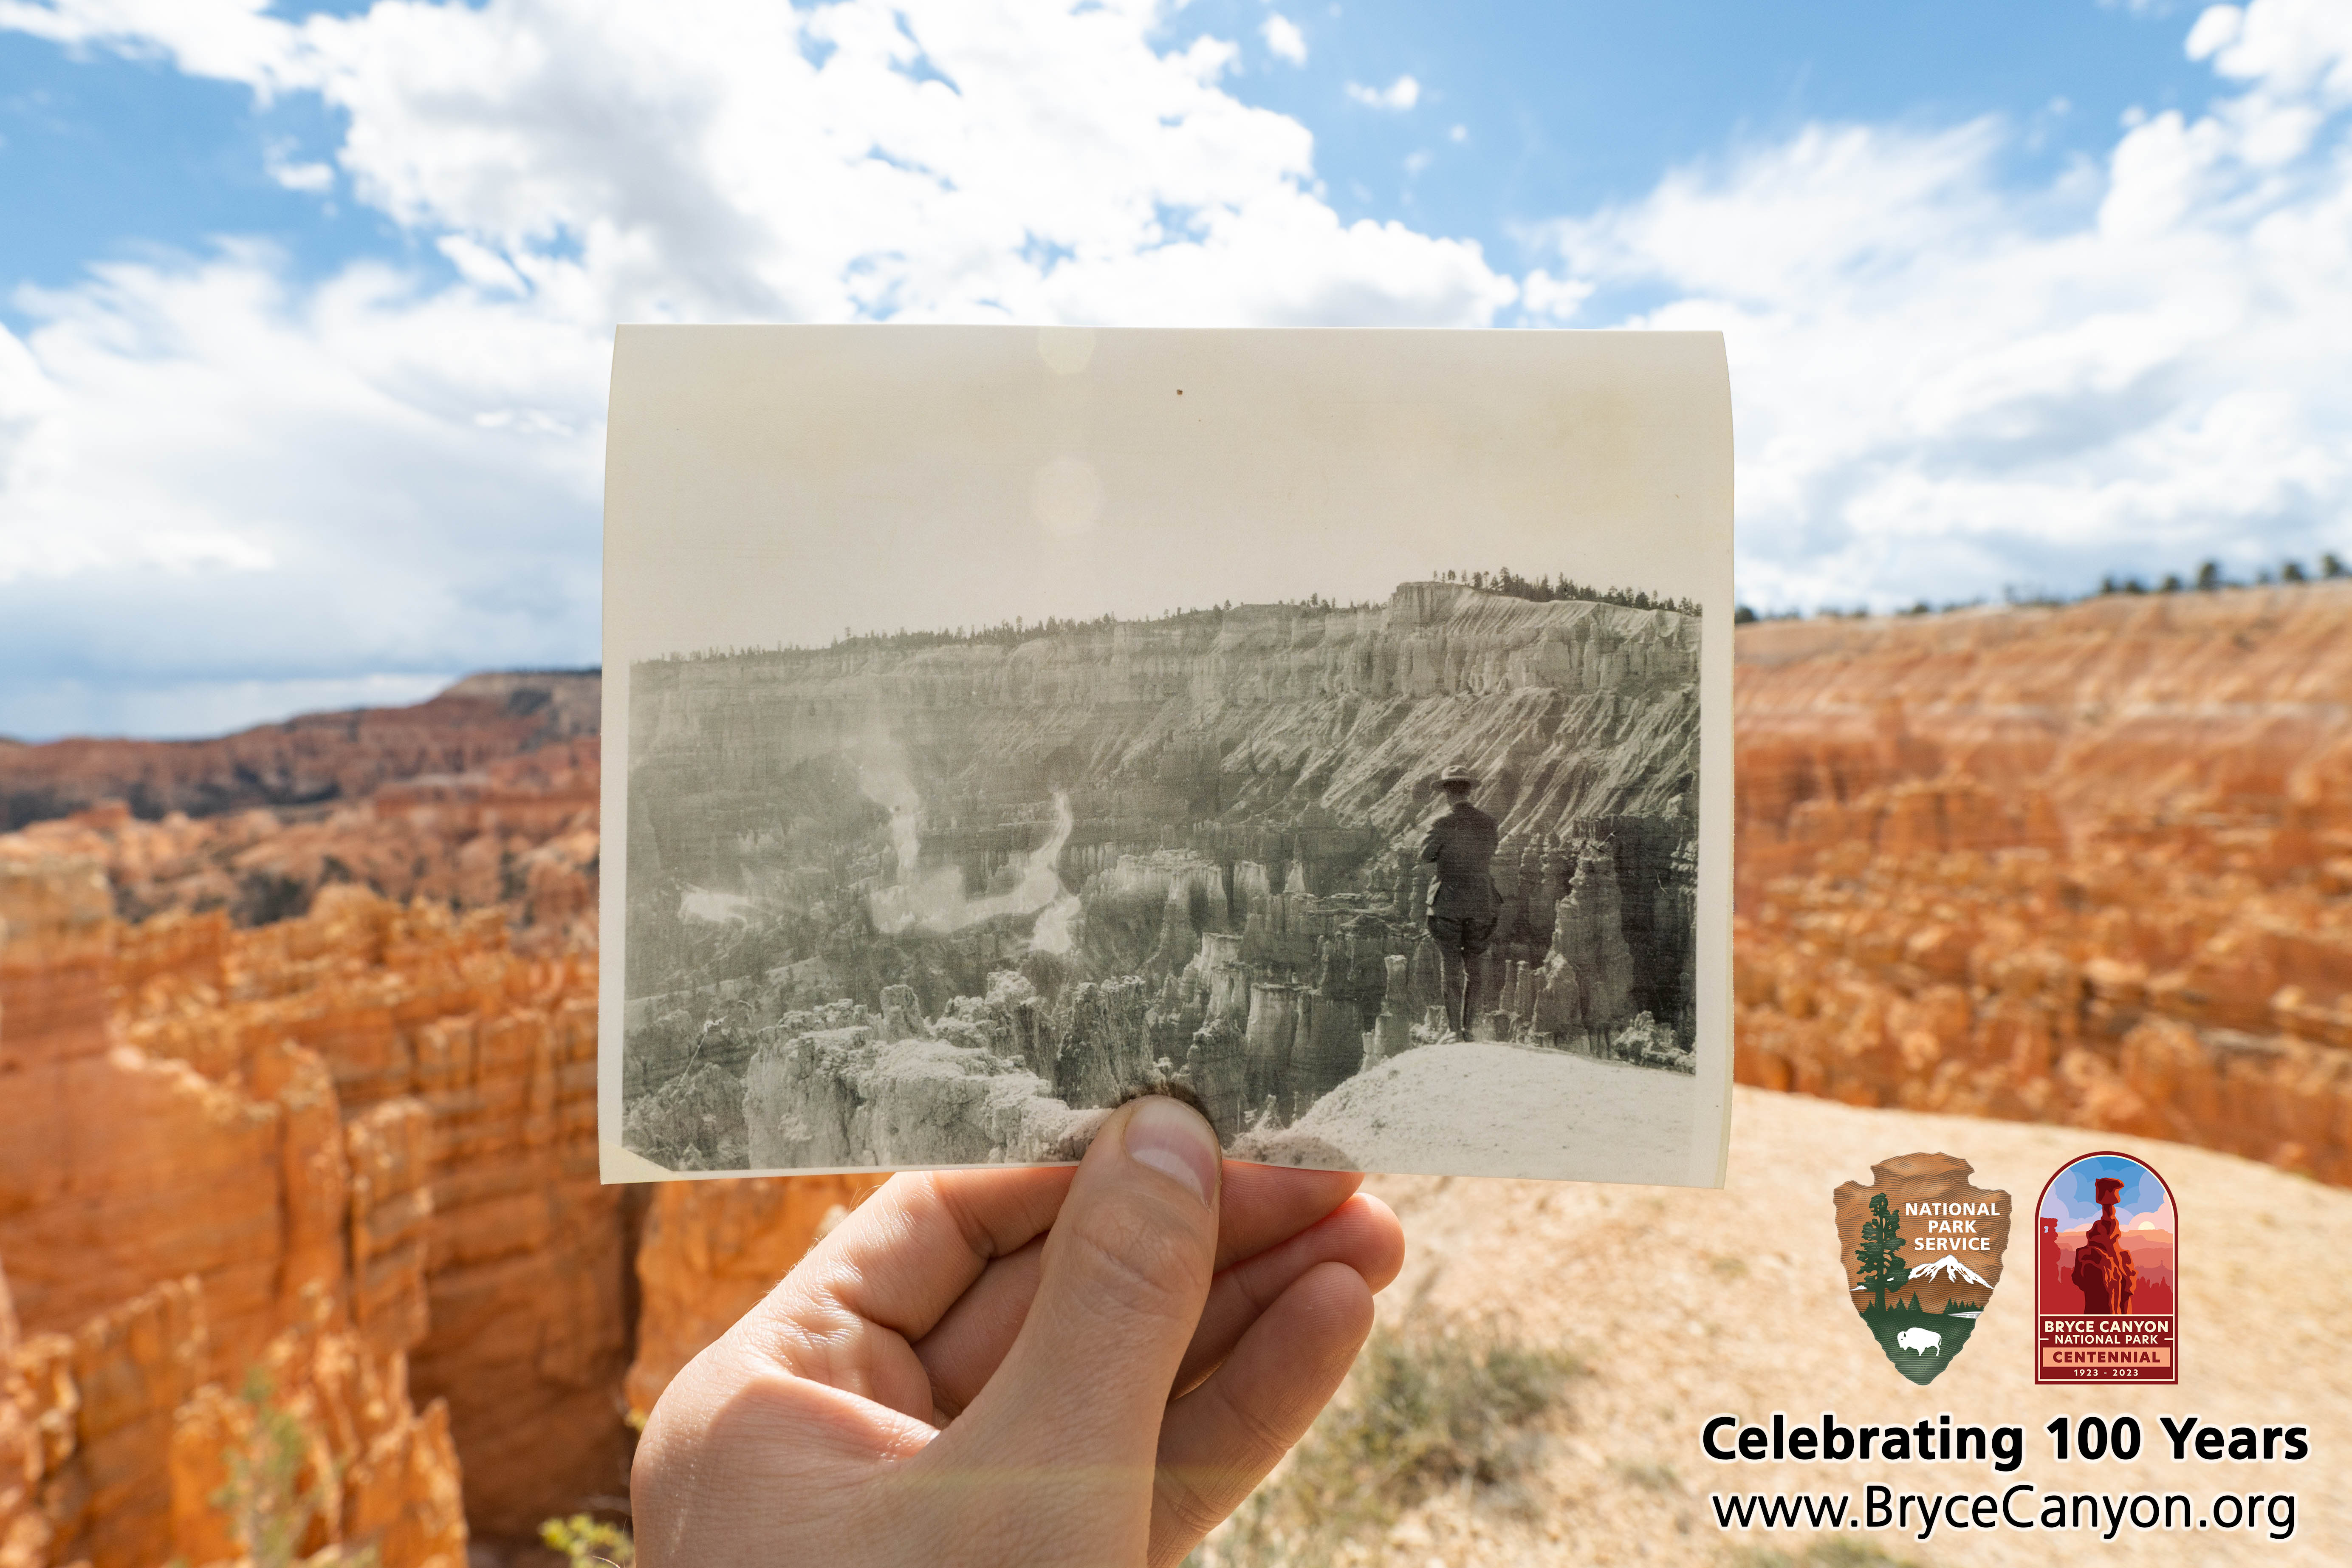 A hand holds up a black and white photo of a man at the edge of a cliff superimposed on a colorful landscape of red rock spires and cliffs.